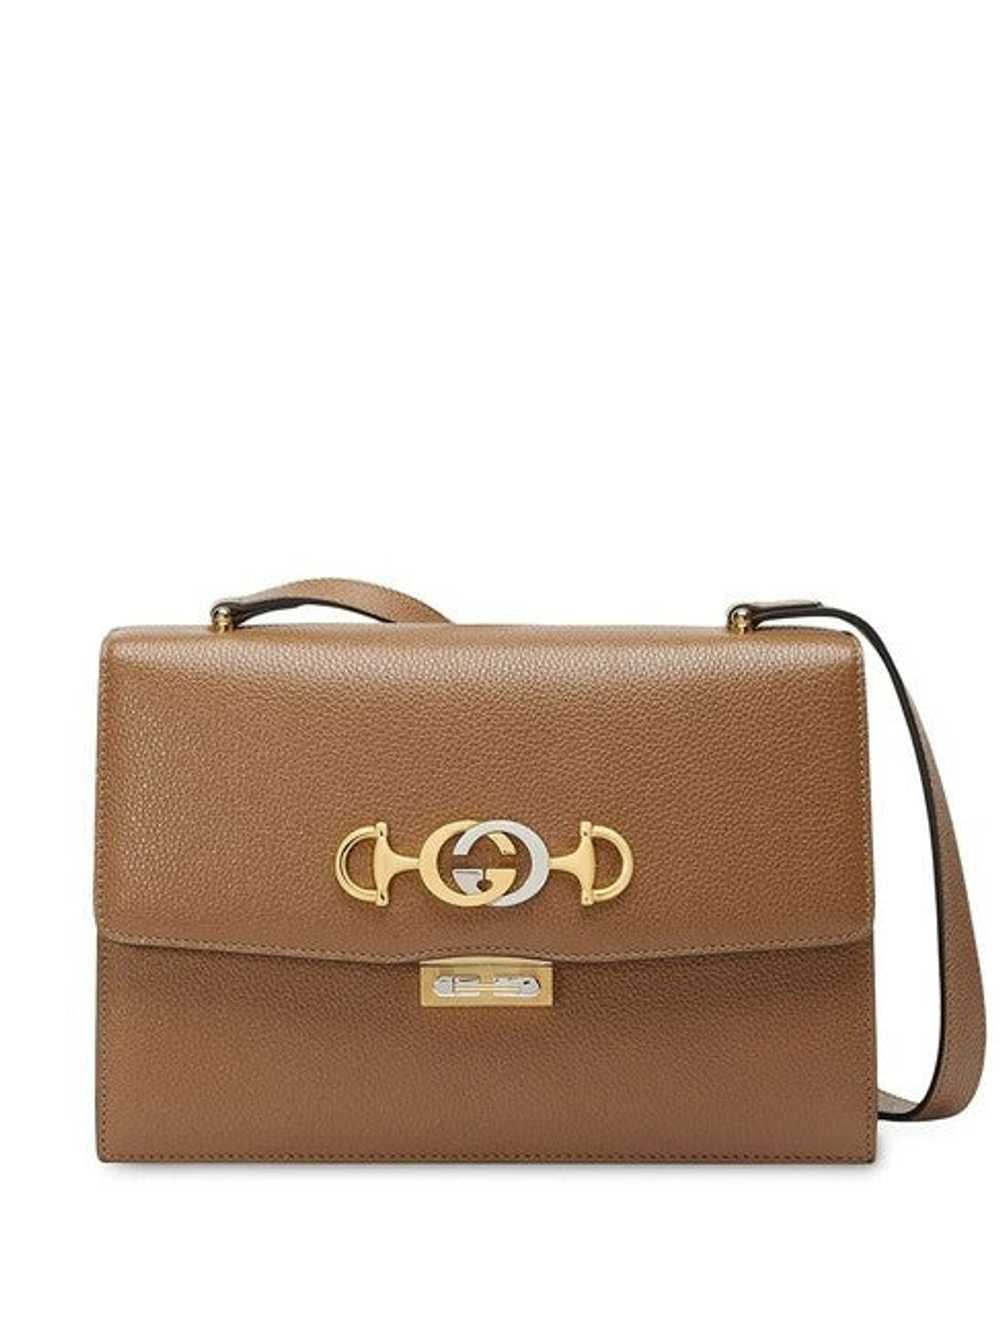 GUCCI Zumi Small Brown Textured Leather Shoulder … - image 1